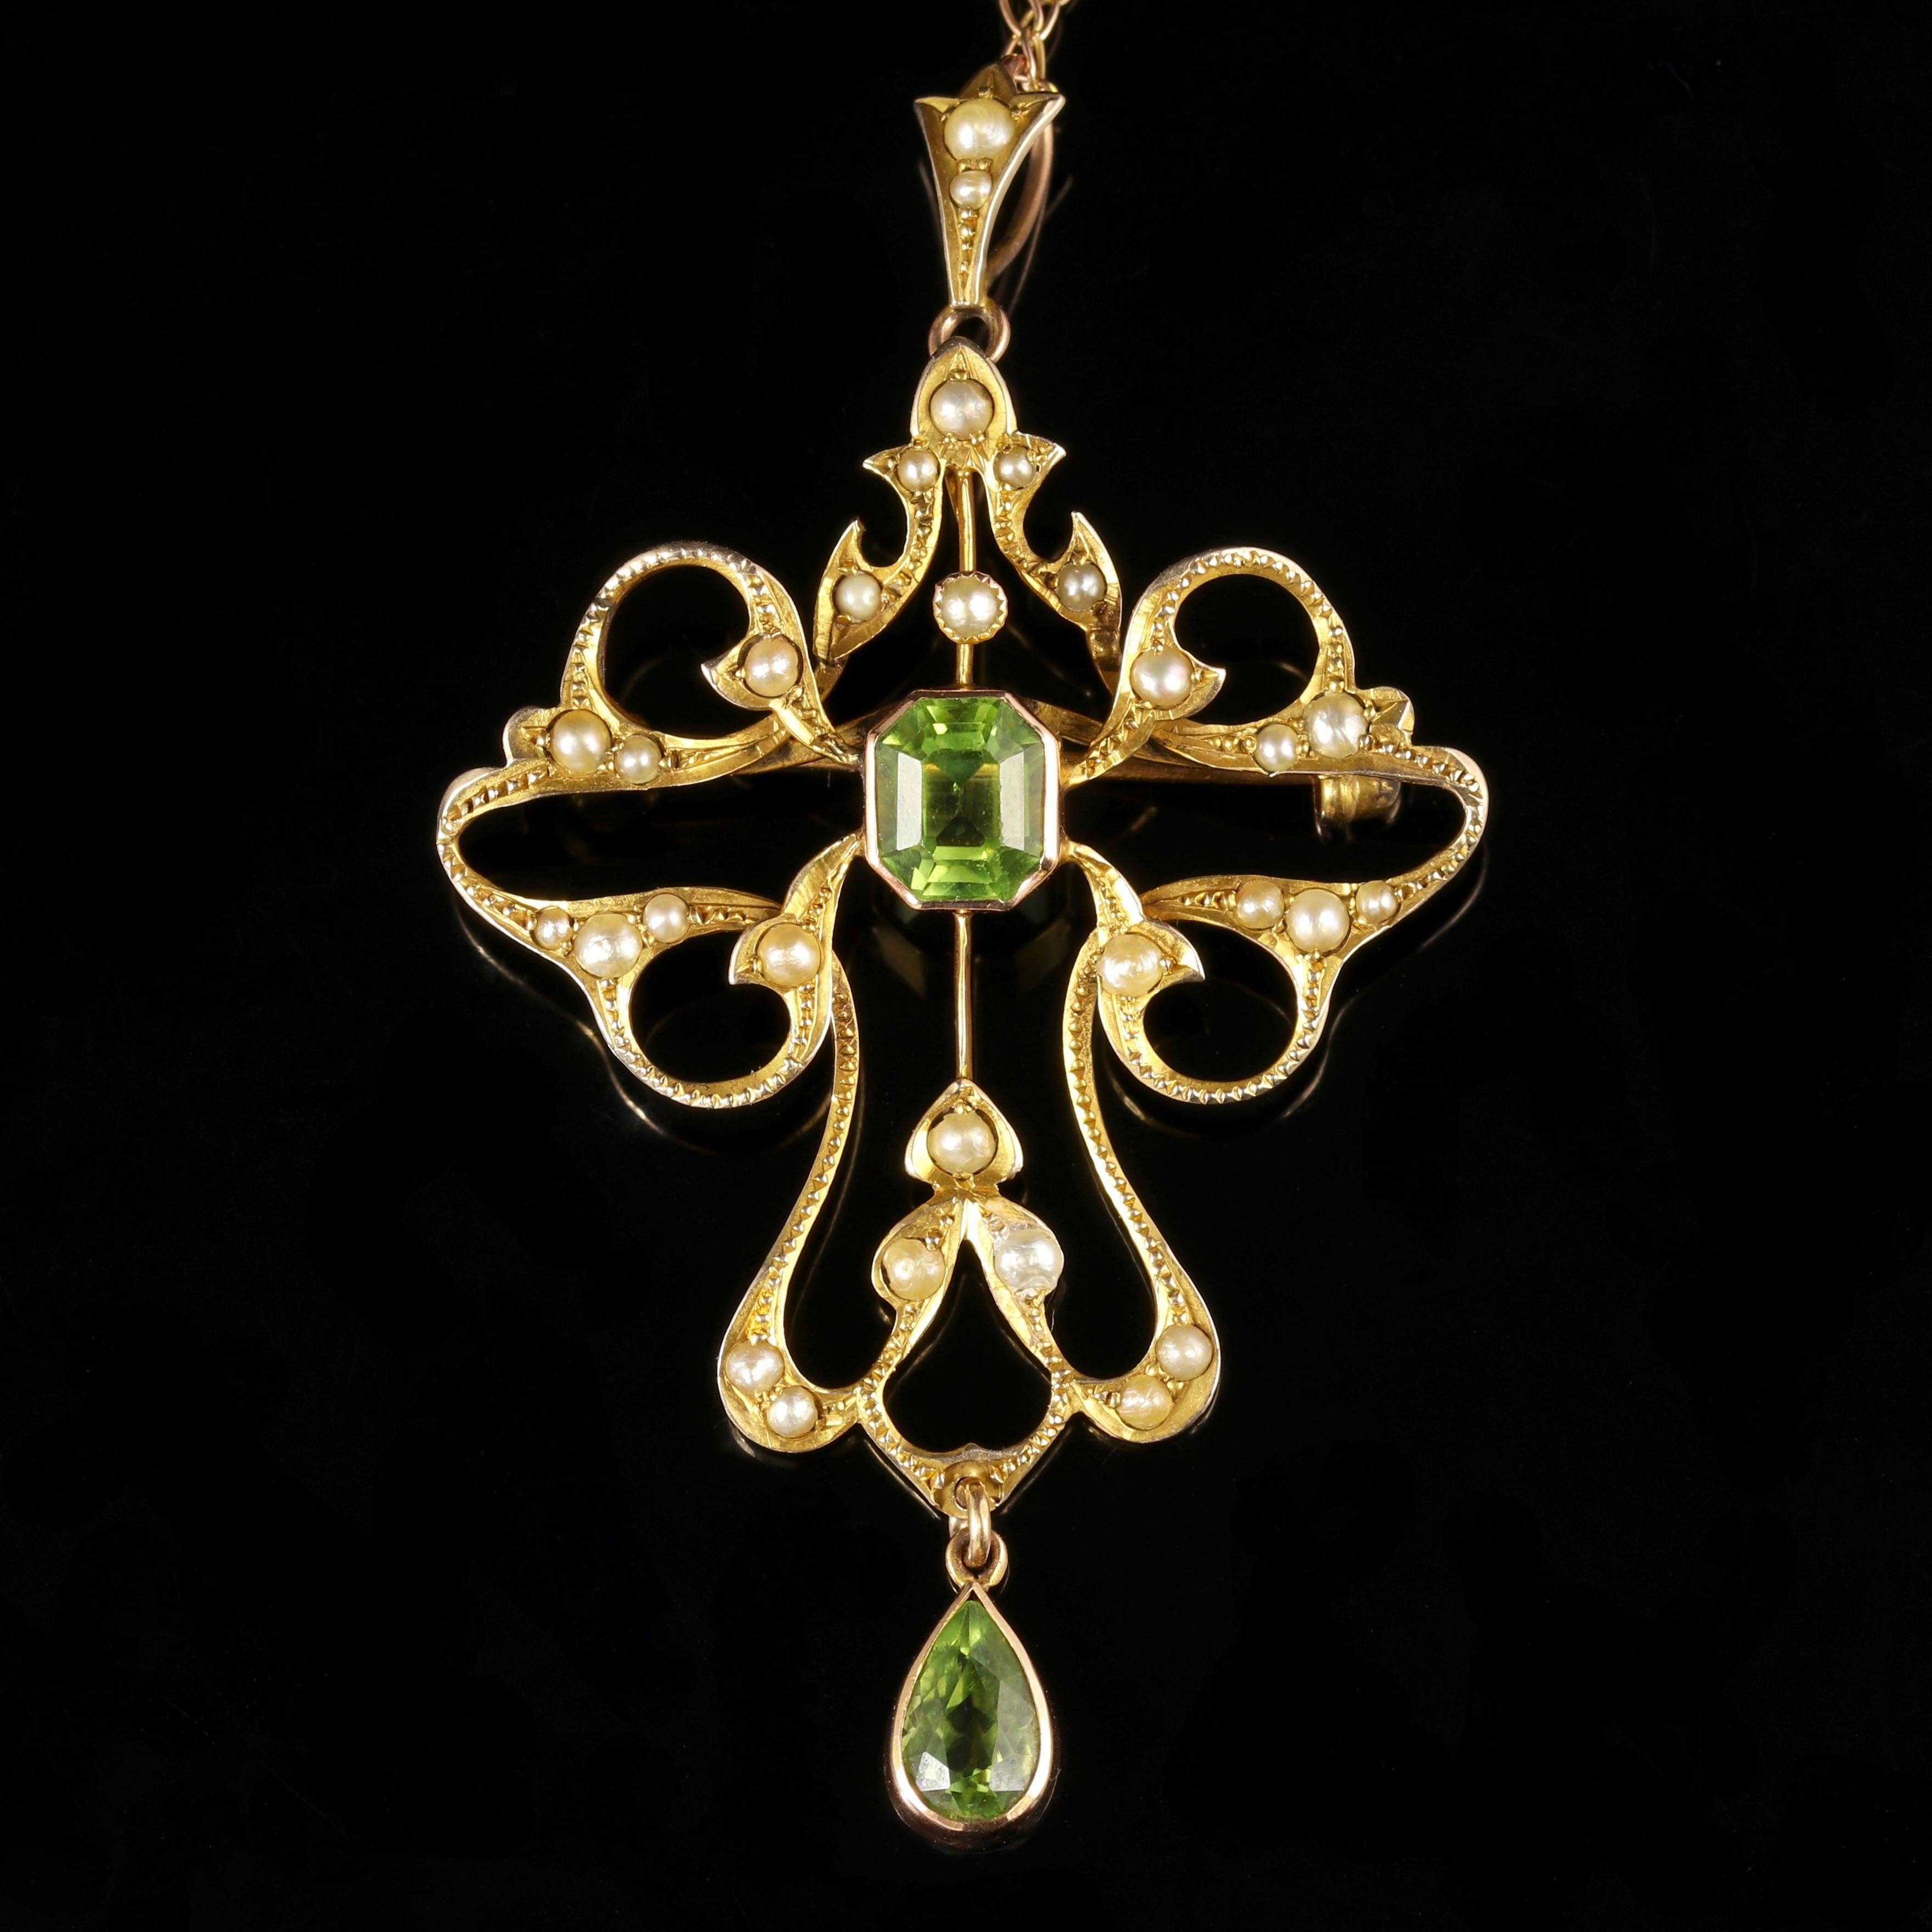 This very beautiful Antique Victorian pendant brooch necklace is Circa 1900.

Adorned with Pearls and Peridots set in 9ct Yellow Gold. 

The Peridot is a stone of lightness and beauty and was believed to be a stone of springtime by ancients who